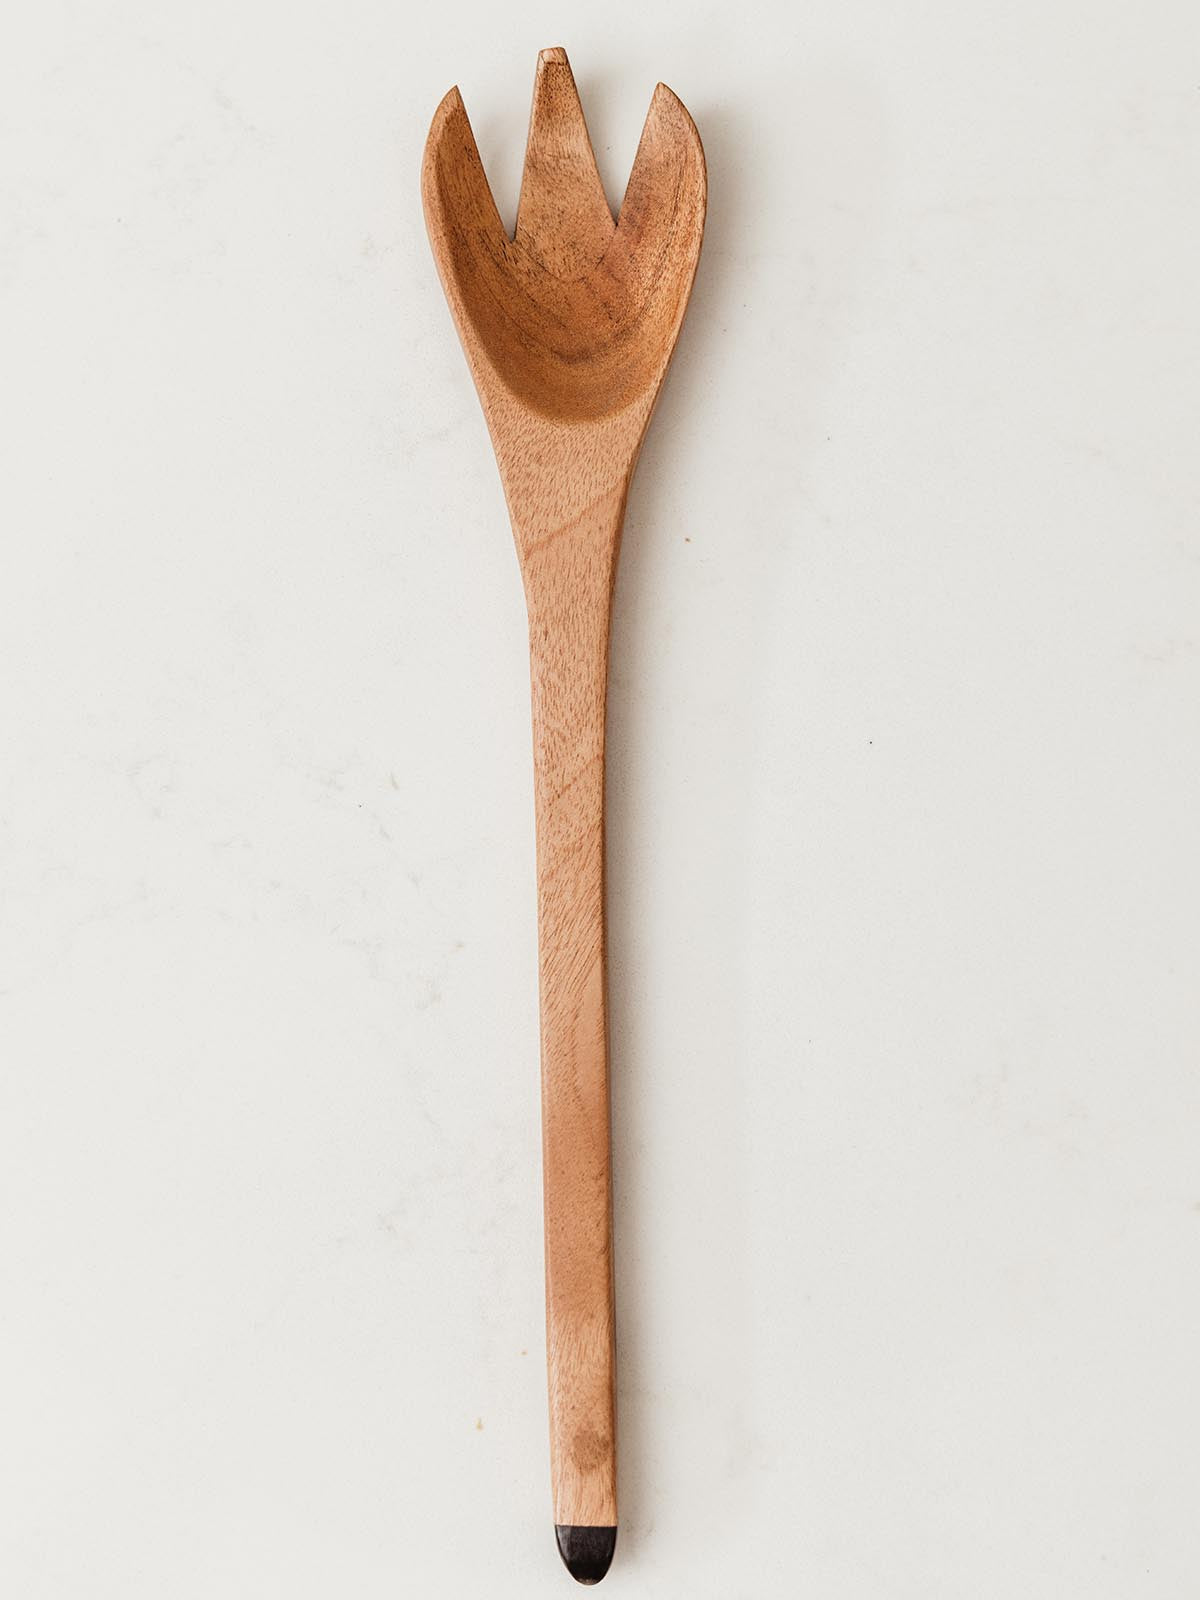 Serving spoon with forked end on white counter.